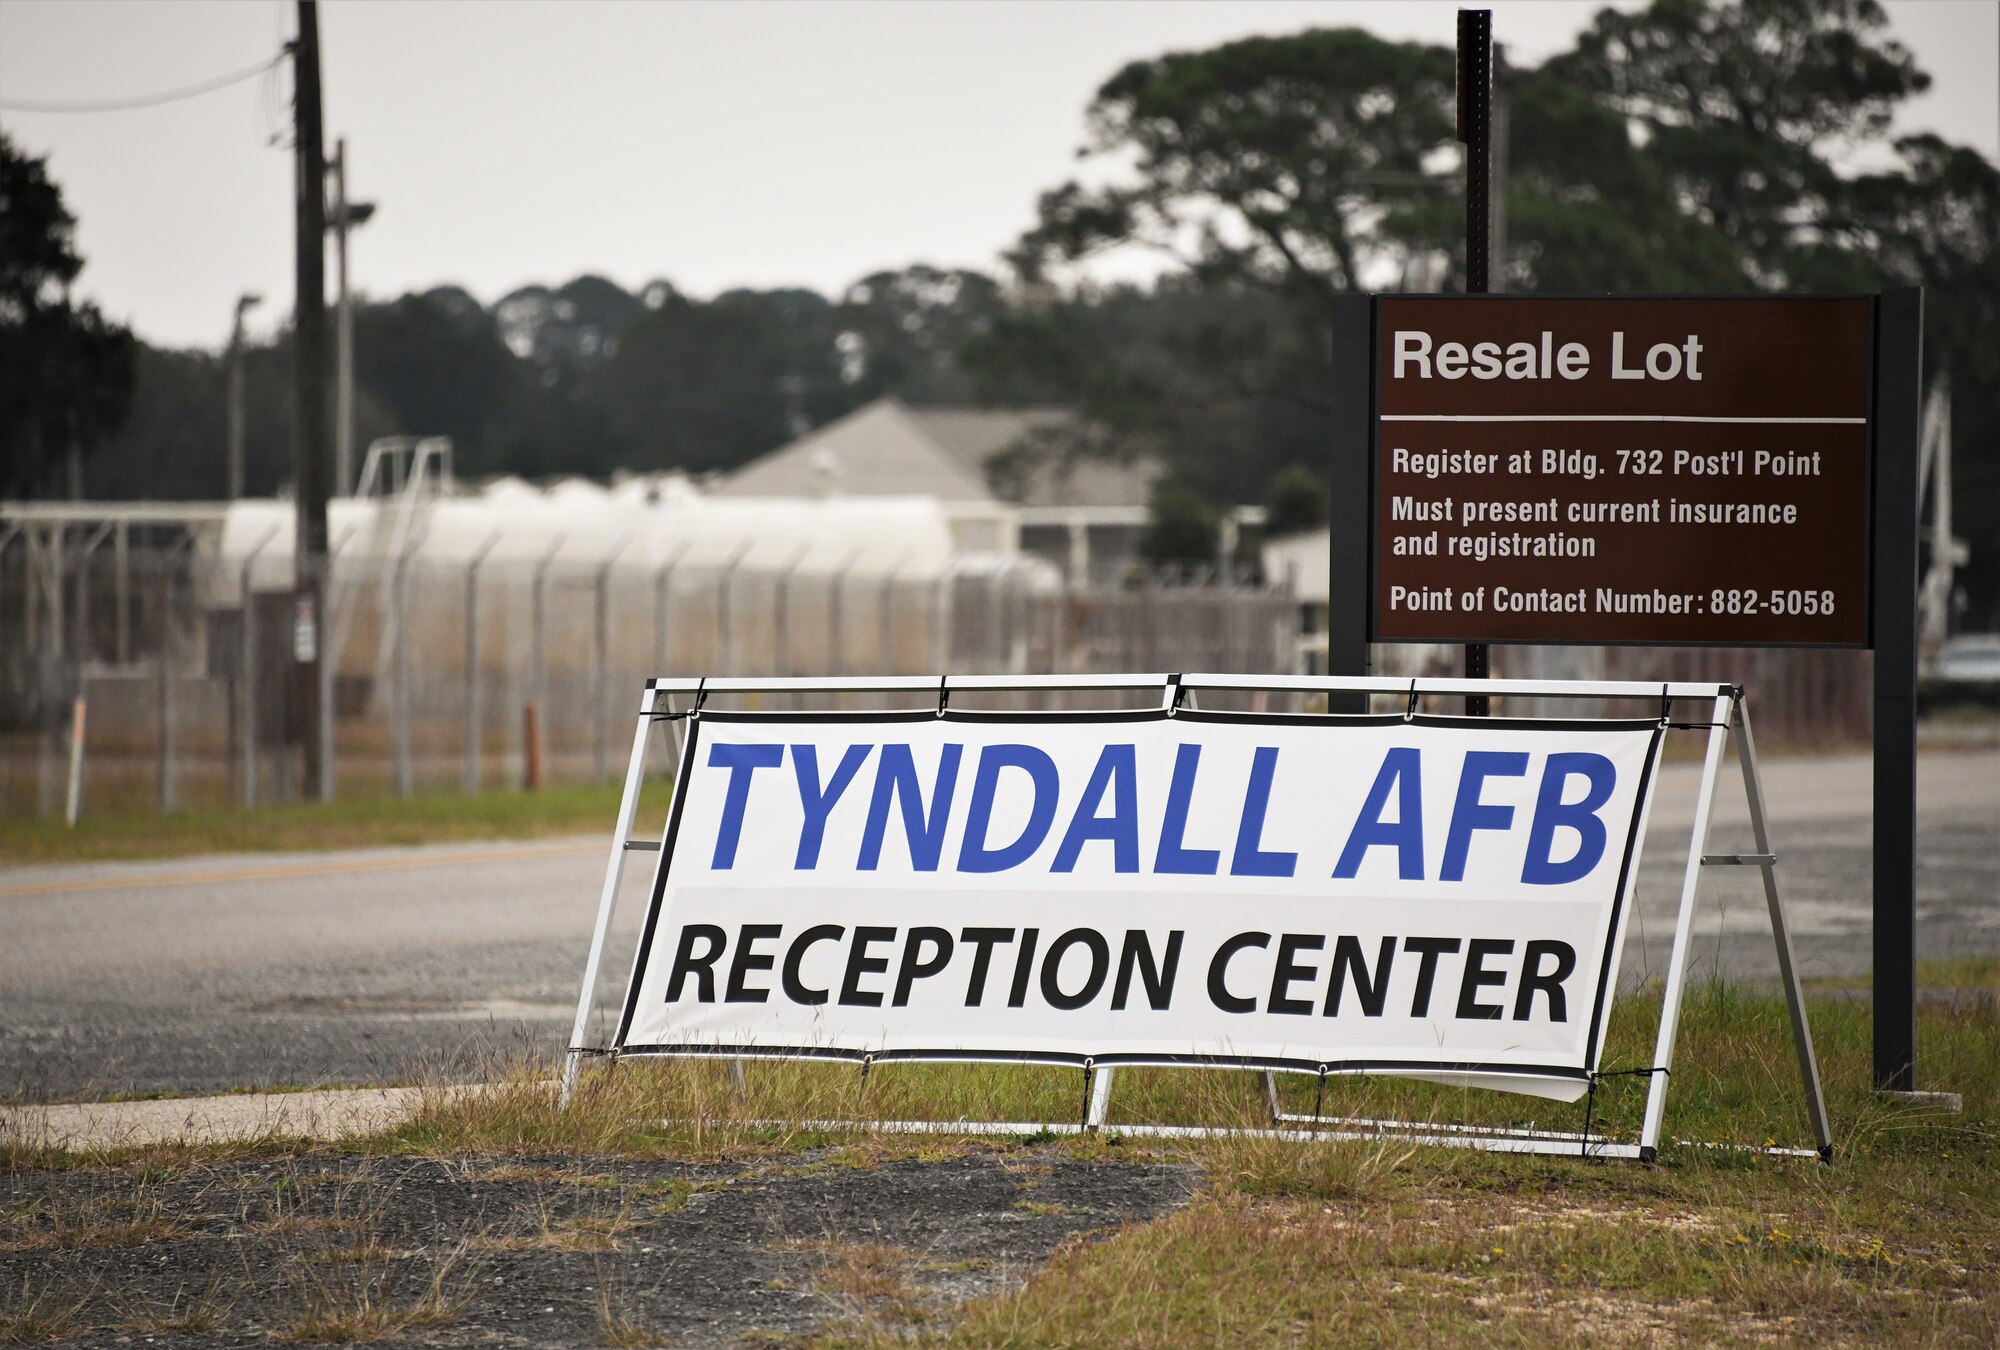 Tyndall AFB Reception Center Sign